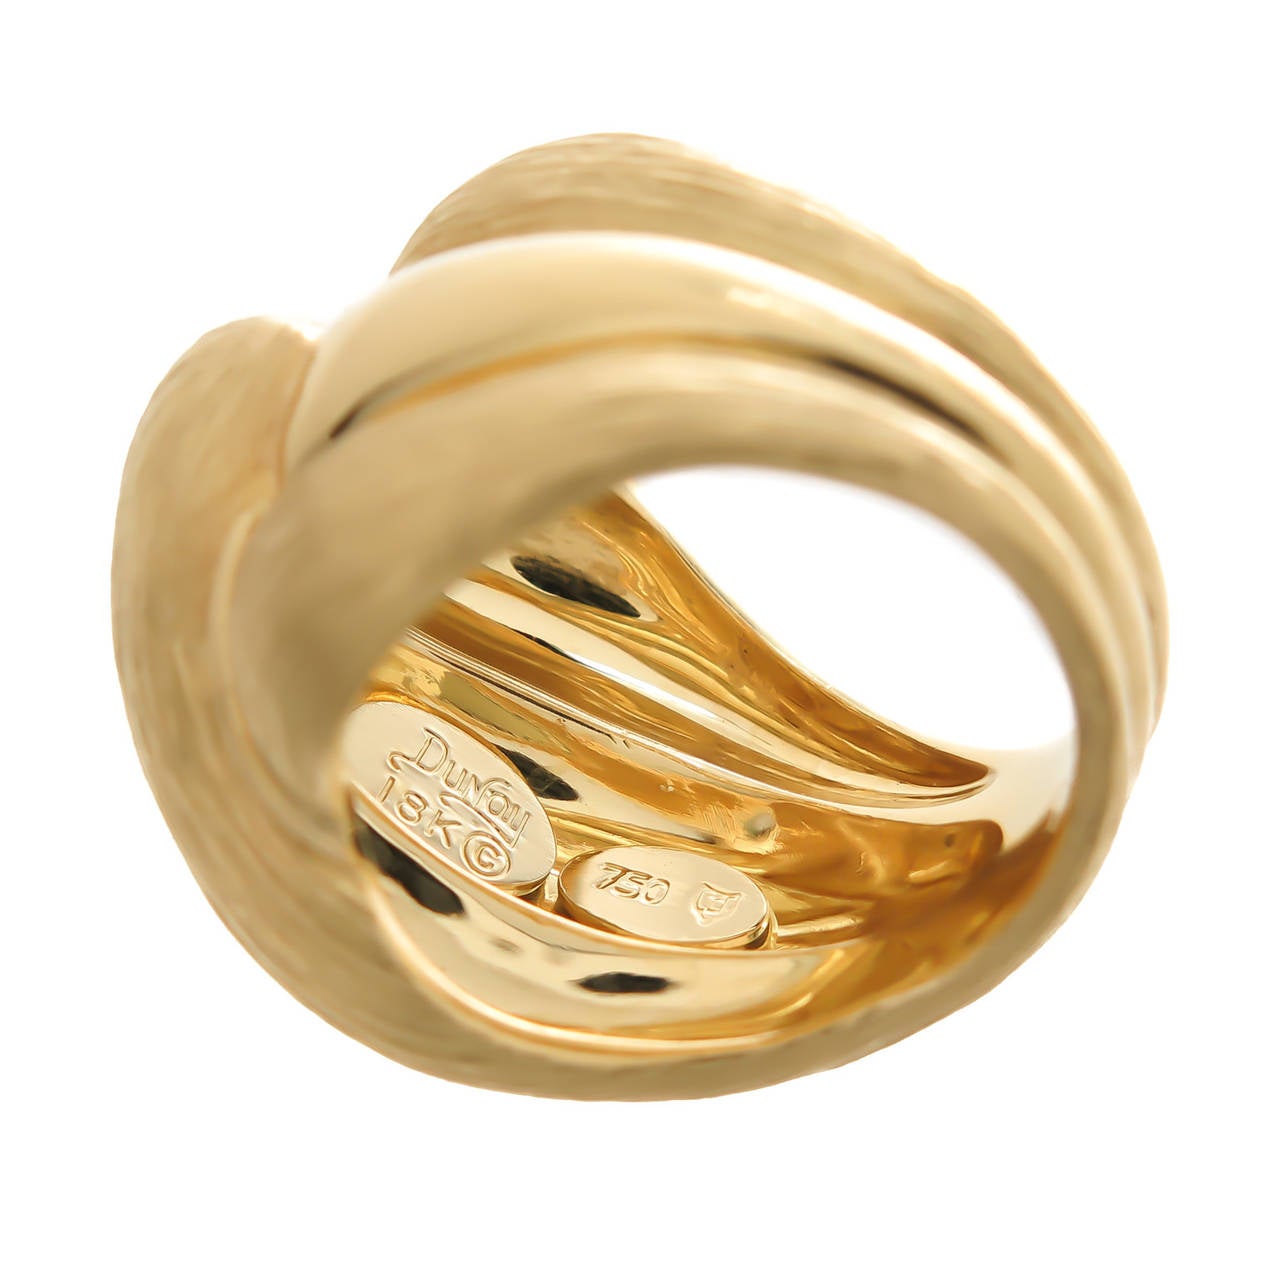 Women's Henry Dunay Gold Sabe Finish Cocktail Ring